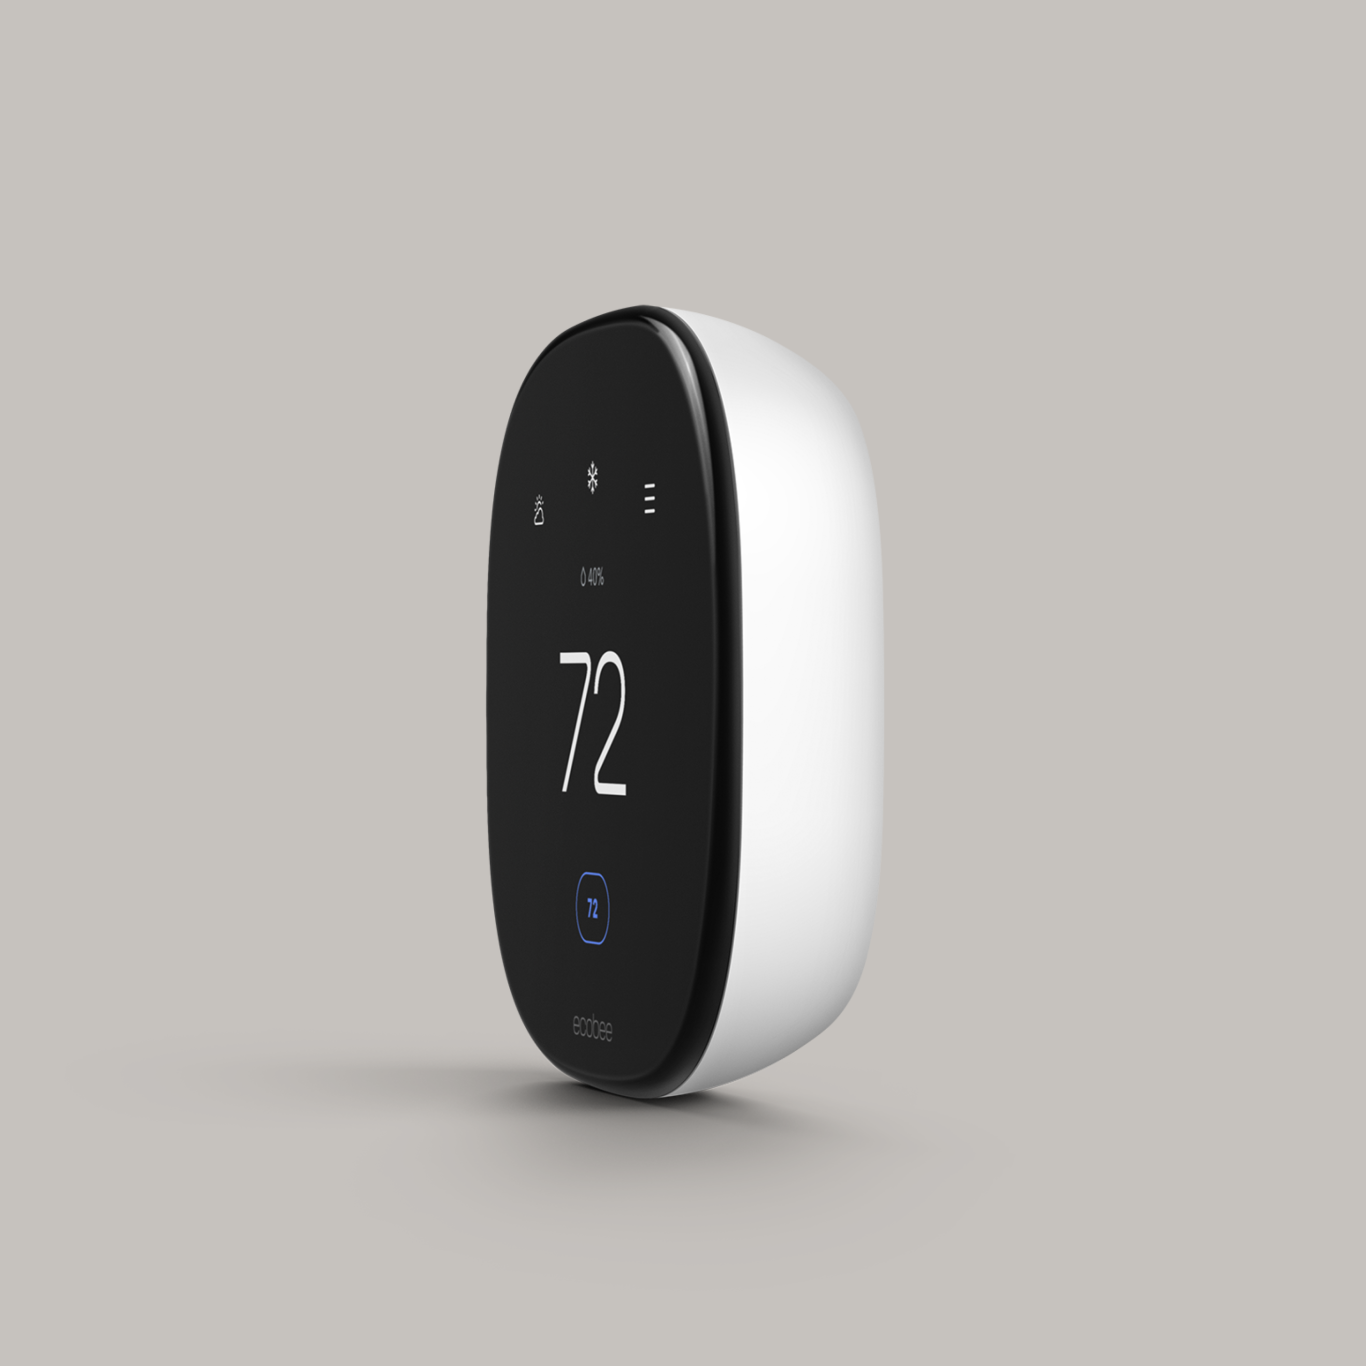 Ecobee Smart Thermostat Enhanced Review